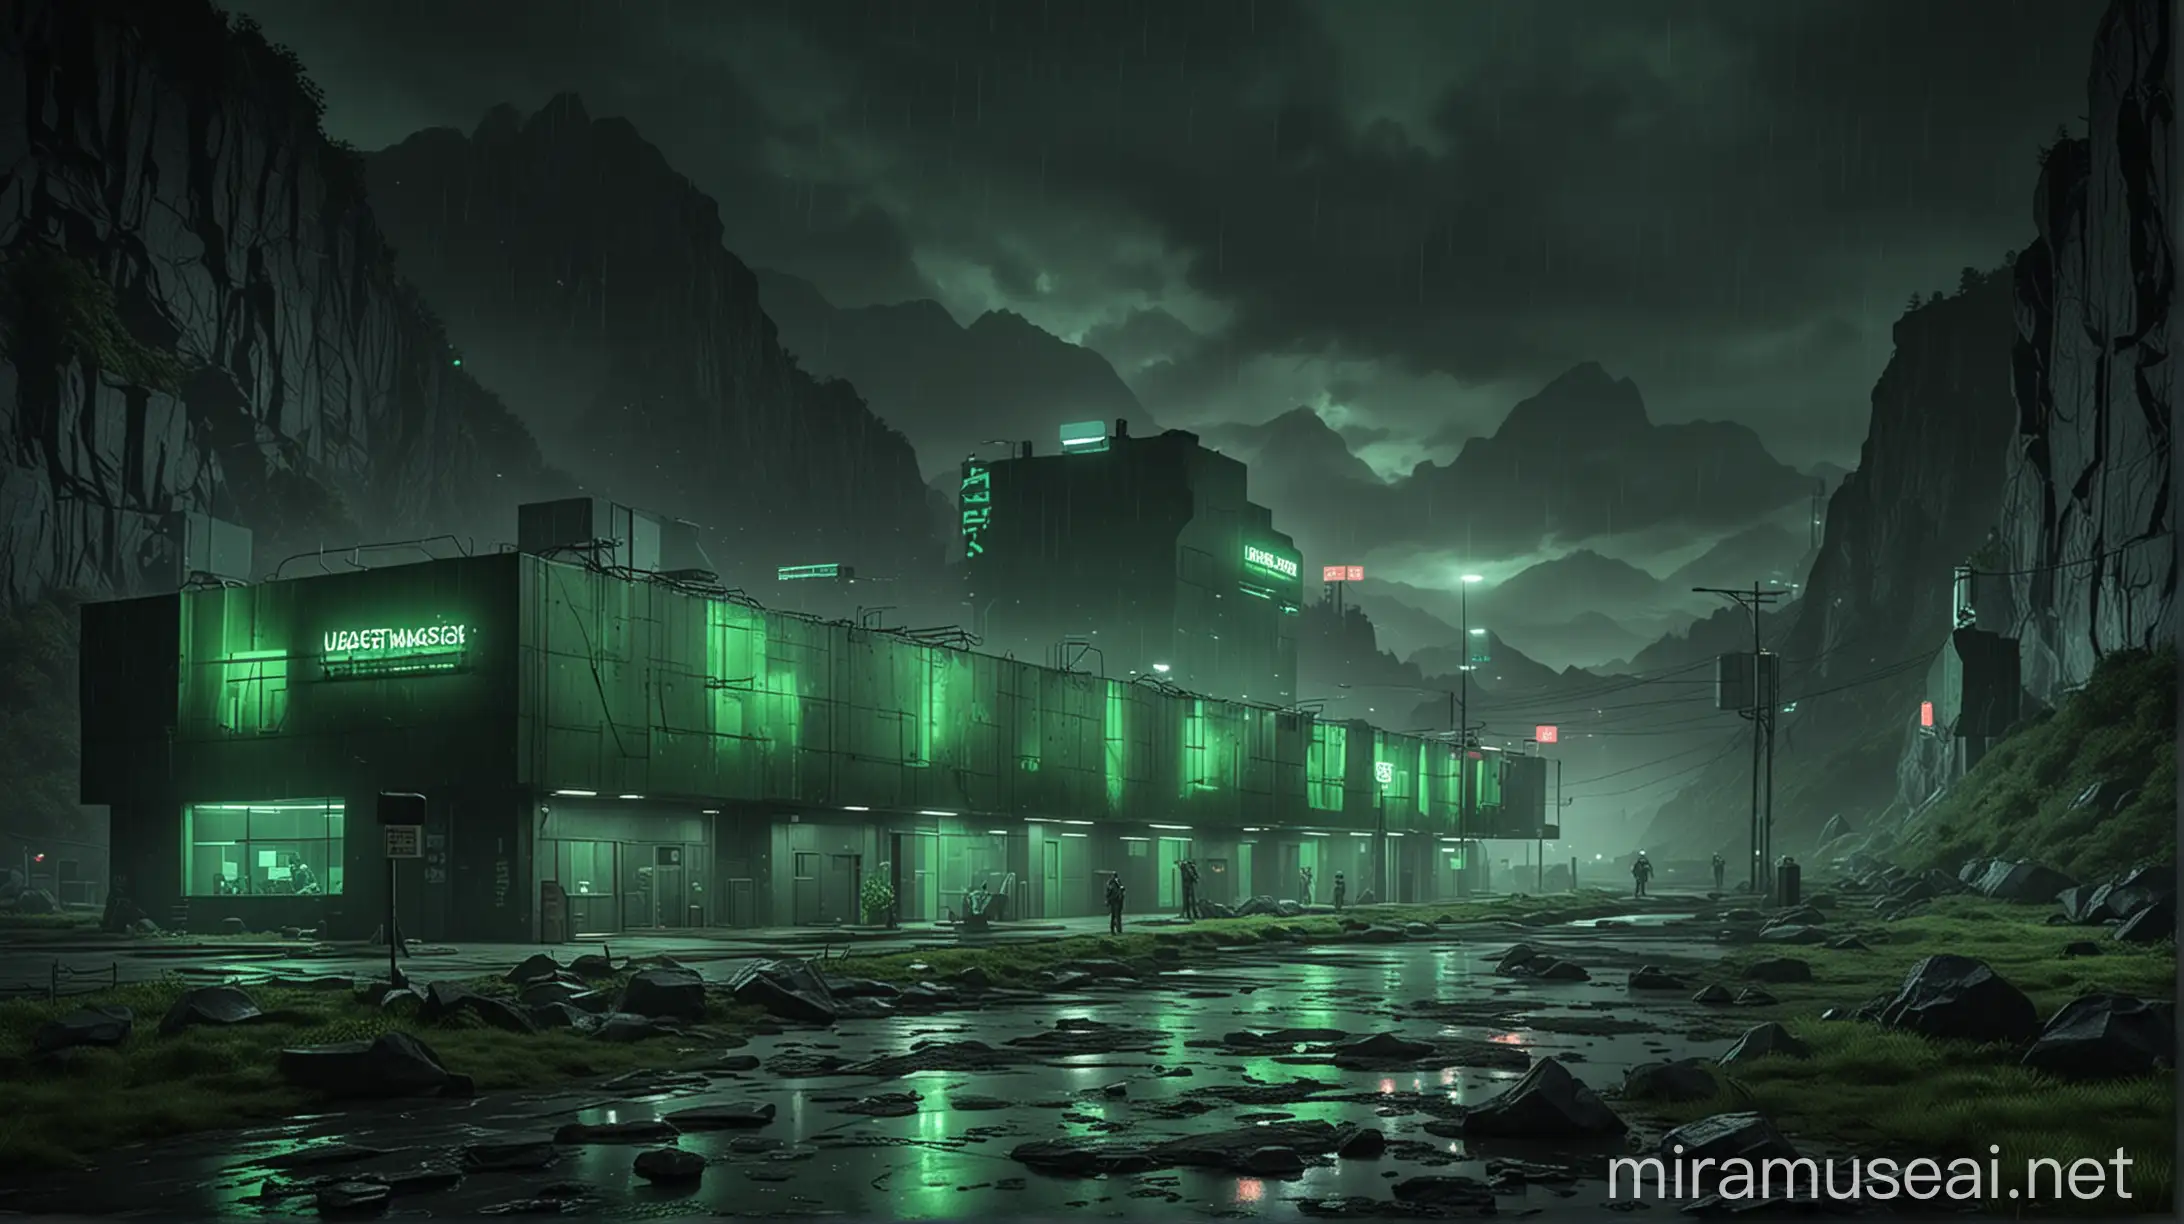 Realistic Tall and MultiStorey Research Center in Rainy Weather with Green Neon Lights